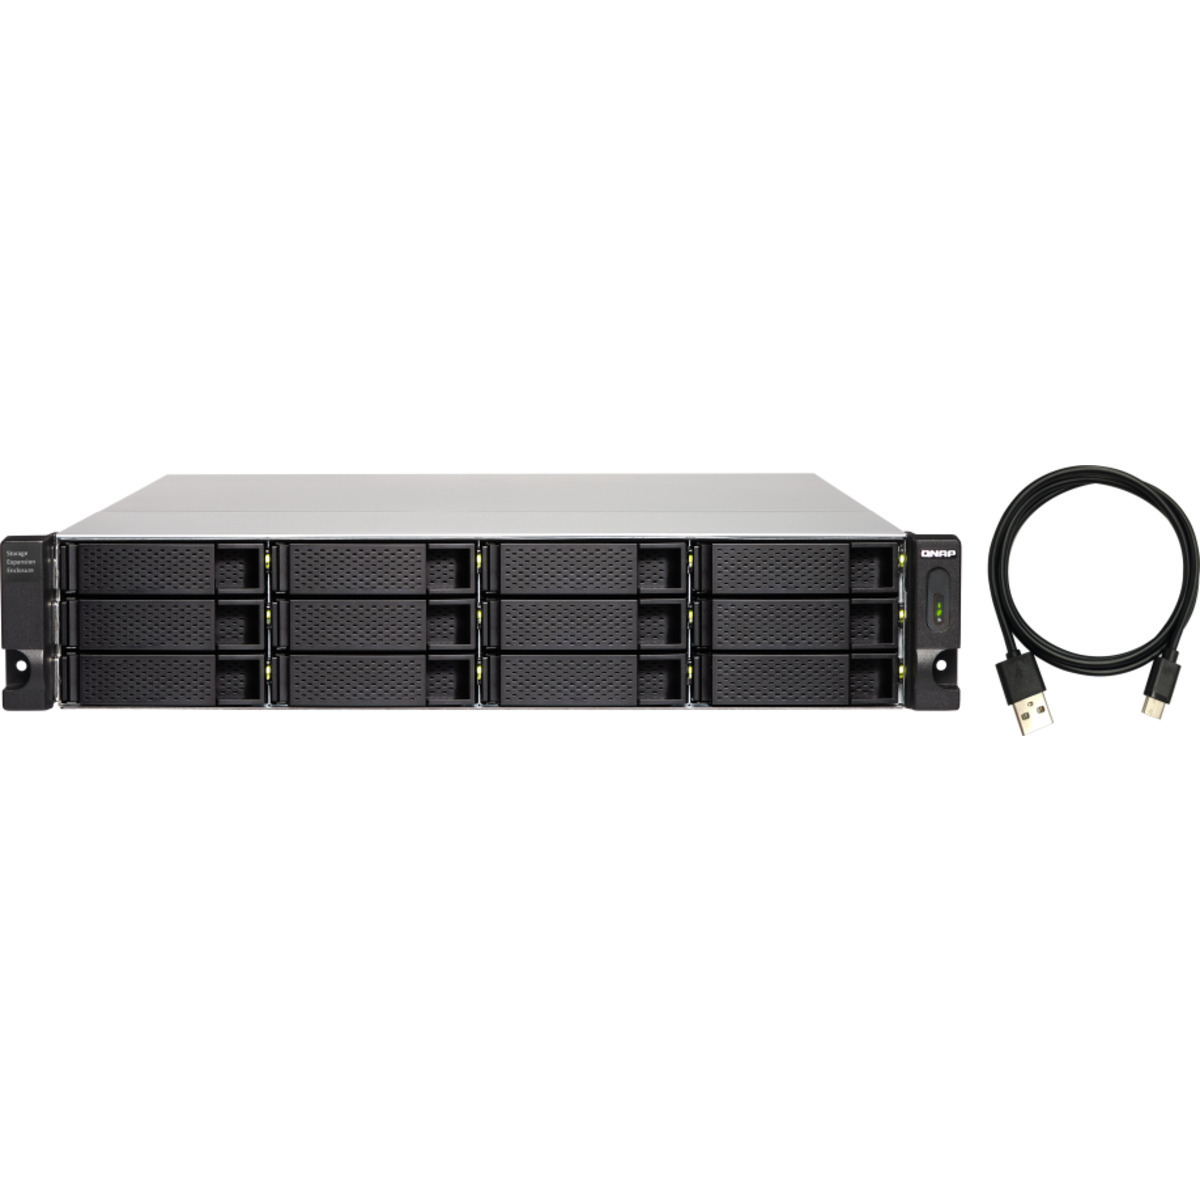 buy $6870 QNAP TL-R1200C-RP External Expansion Drive 240tb RackMount Expansion Enclosure 12x20000gb Western Digital Ultrastar DC HC560 WUH722020ALE6L4 3.5 7200rpm SATA 6Gb/s HDD ENTERPRISE Class Drives Installed - Burn-In Tested - nas headquarters buy network attached storage server device das new raid-5 free shipping simply usa TL-R1200C-RP External Expansion Drive